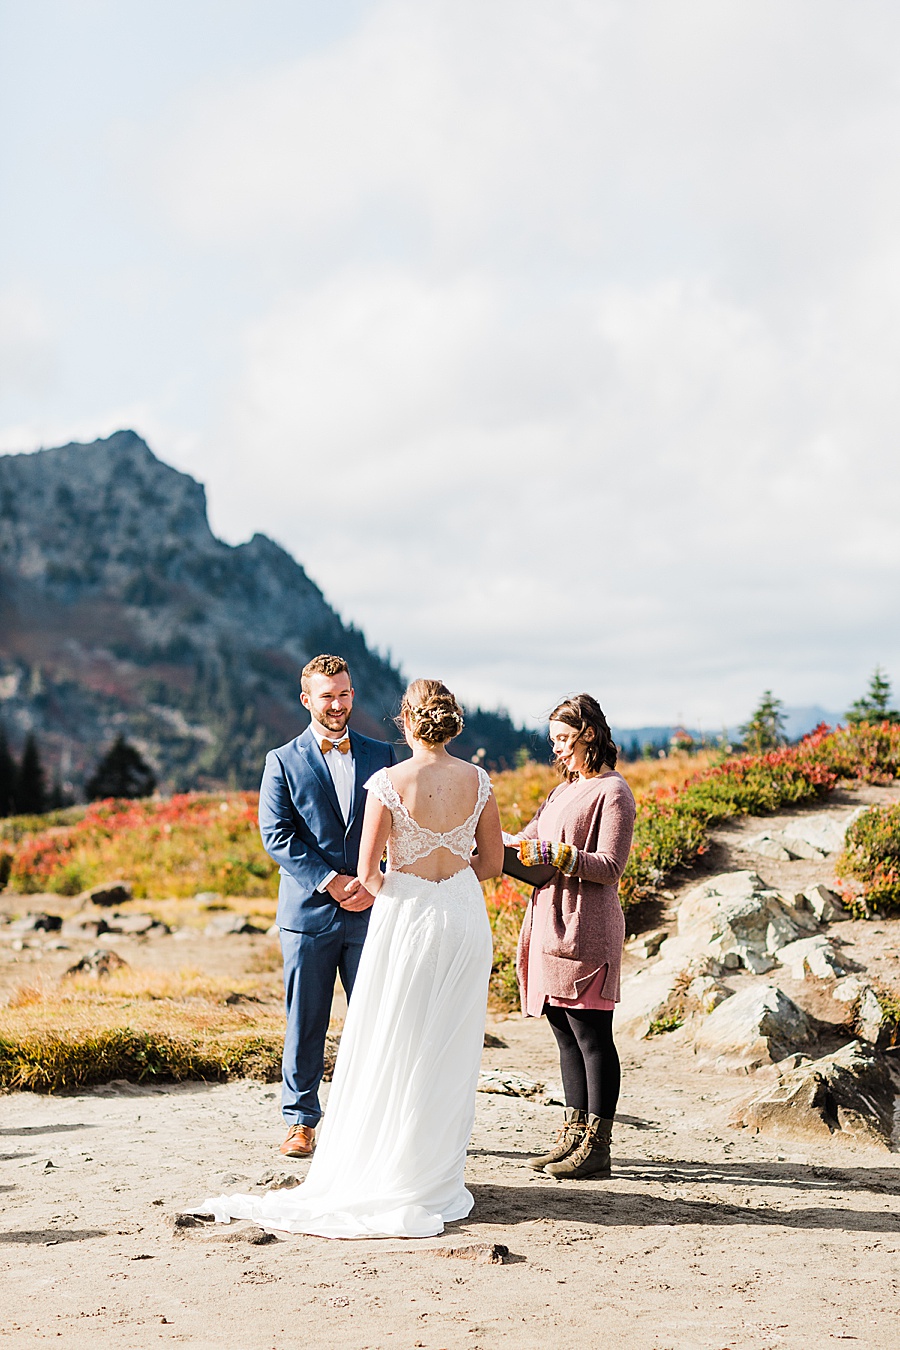 A couple says their marriage vows during a backcountry wedding as they elope in mt rainier